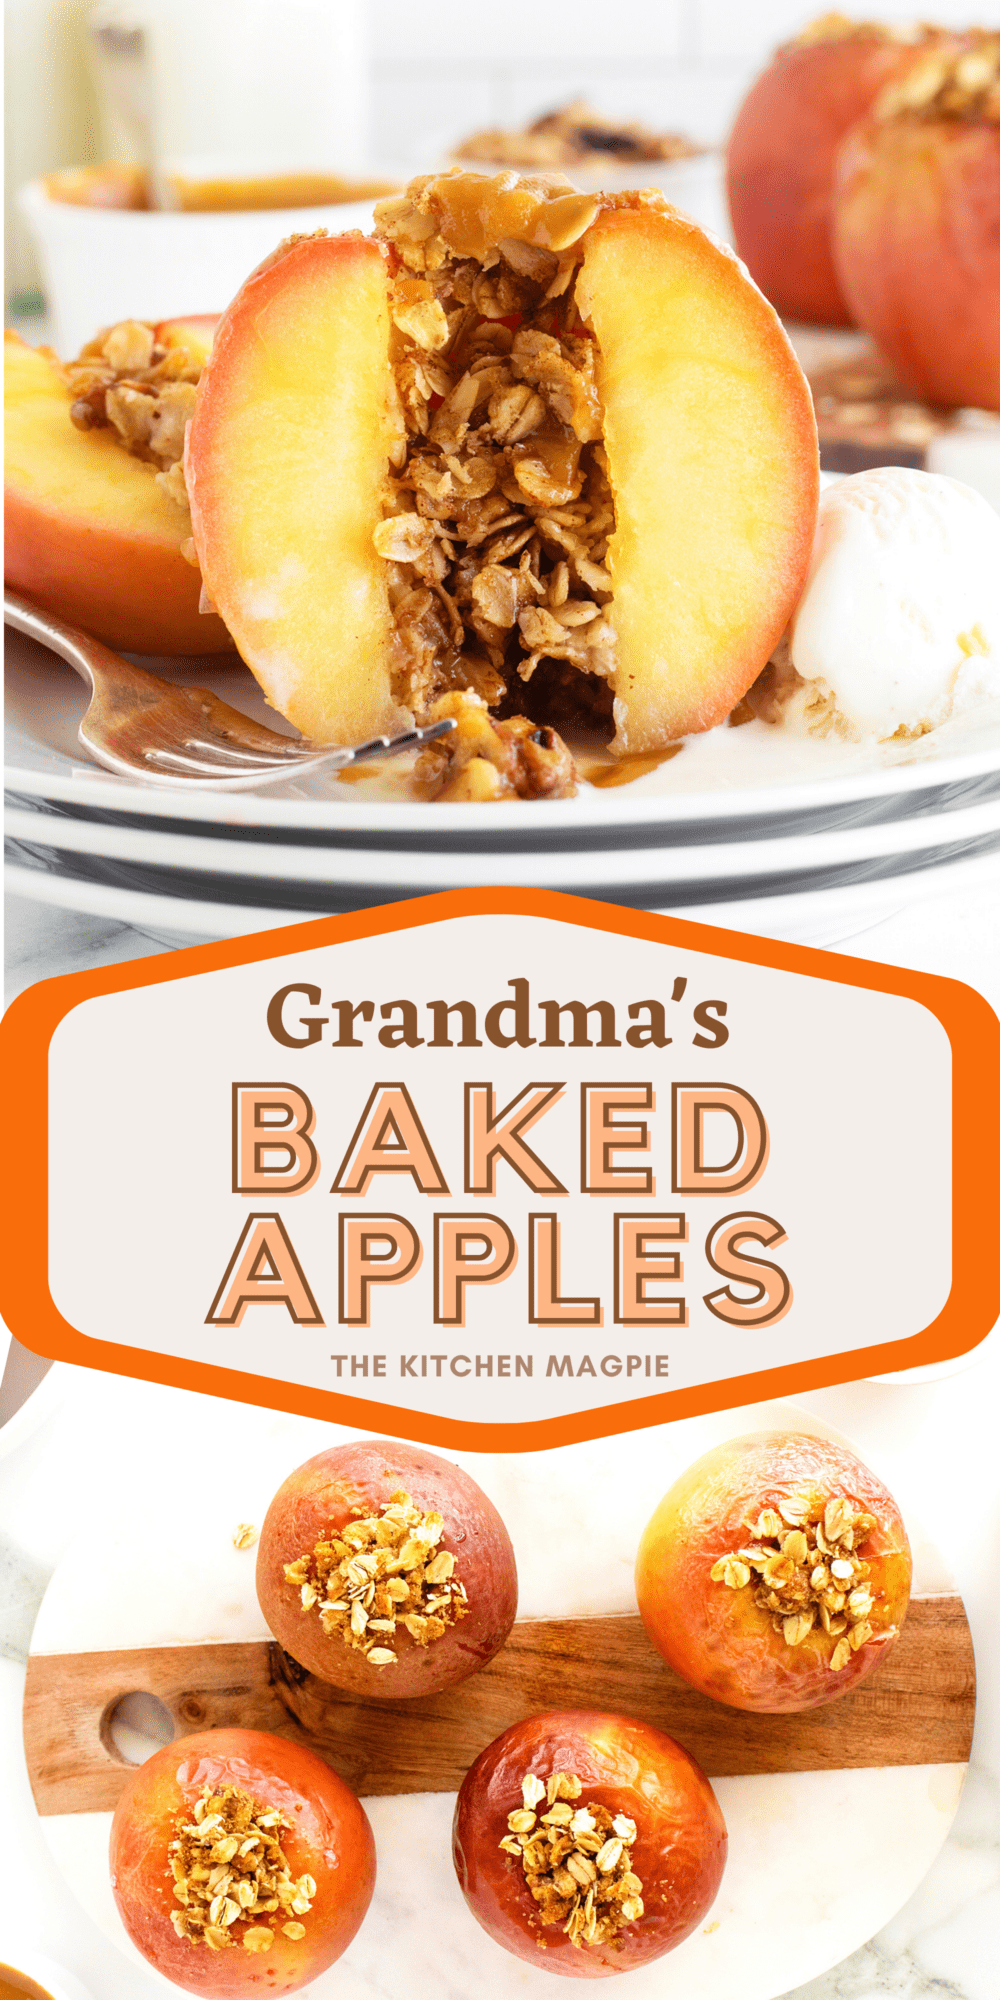 These baked apples are stuffed with a decadent sweet brown sugar, oats, and nut filling and then baked to tender perfection and topped with ice cream and caramel sauce!